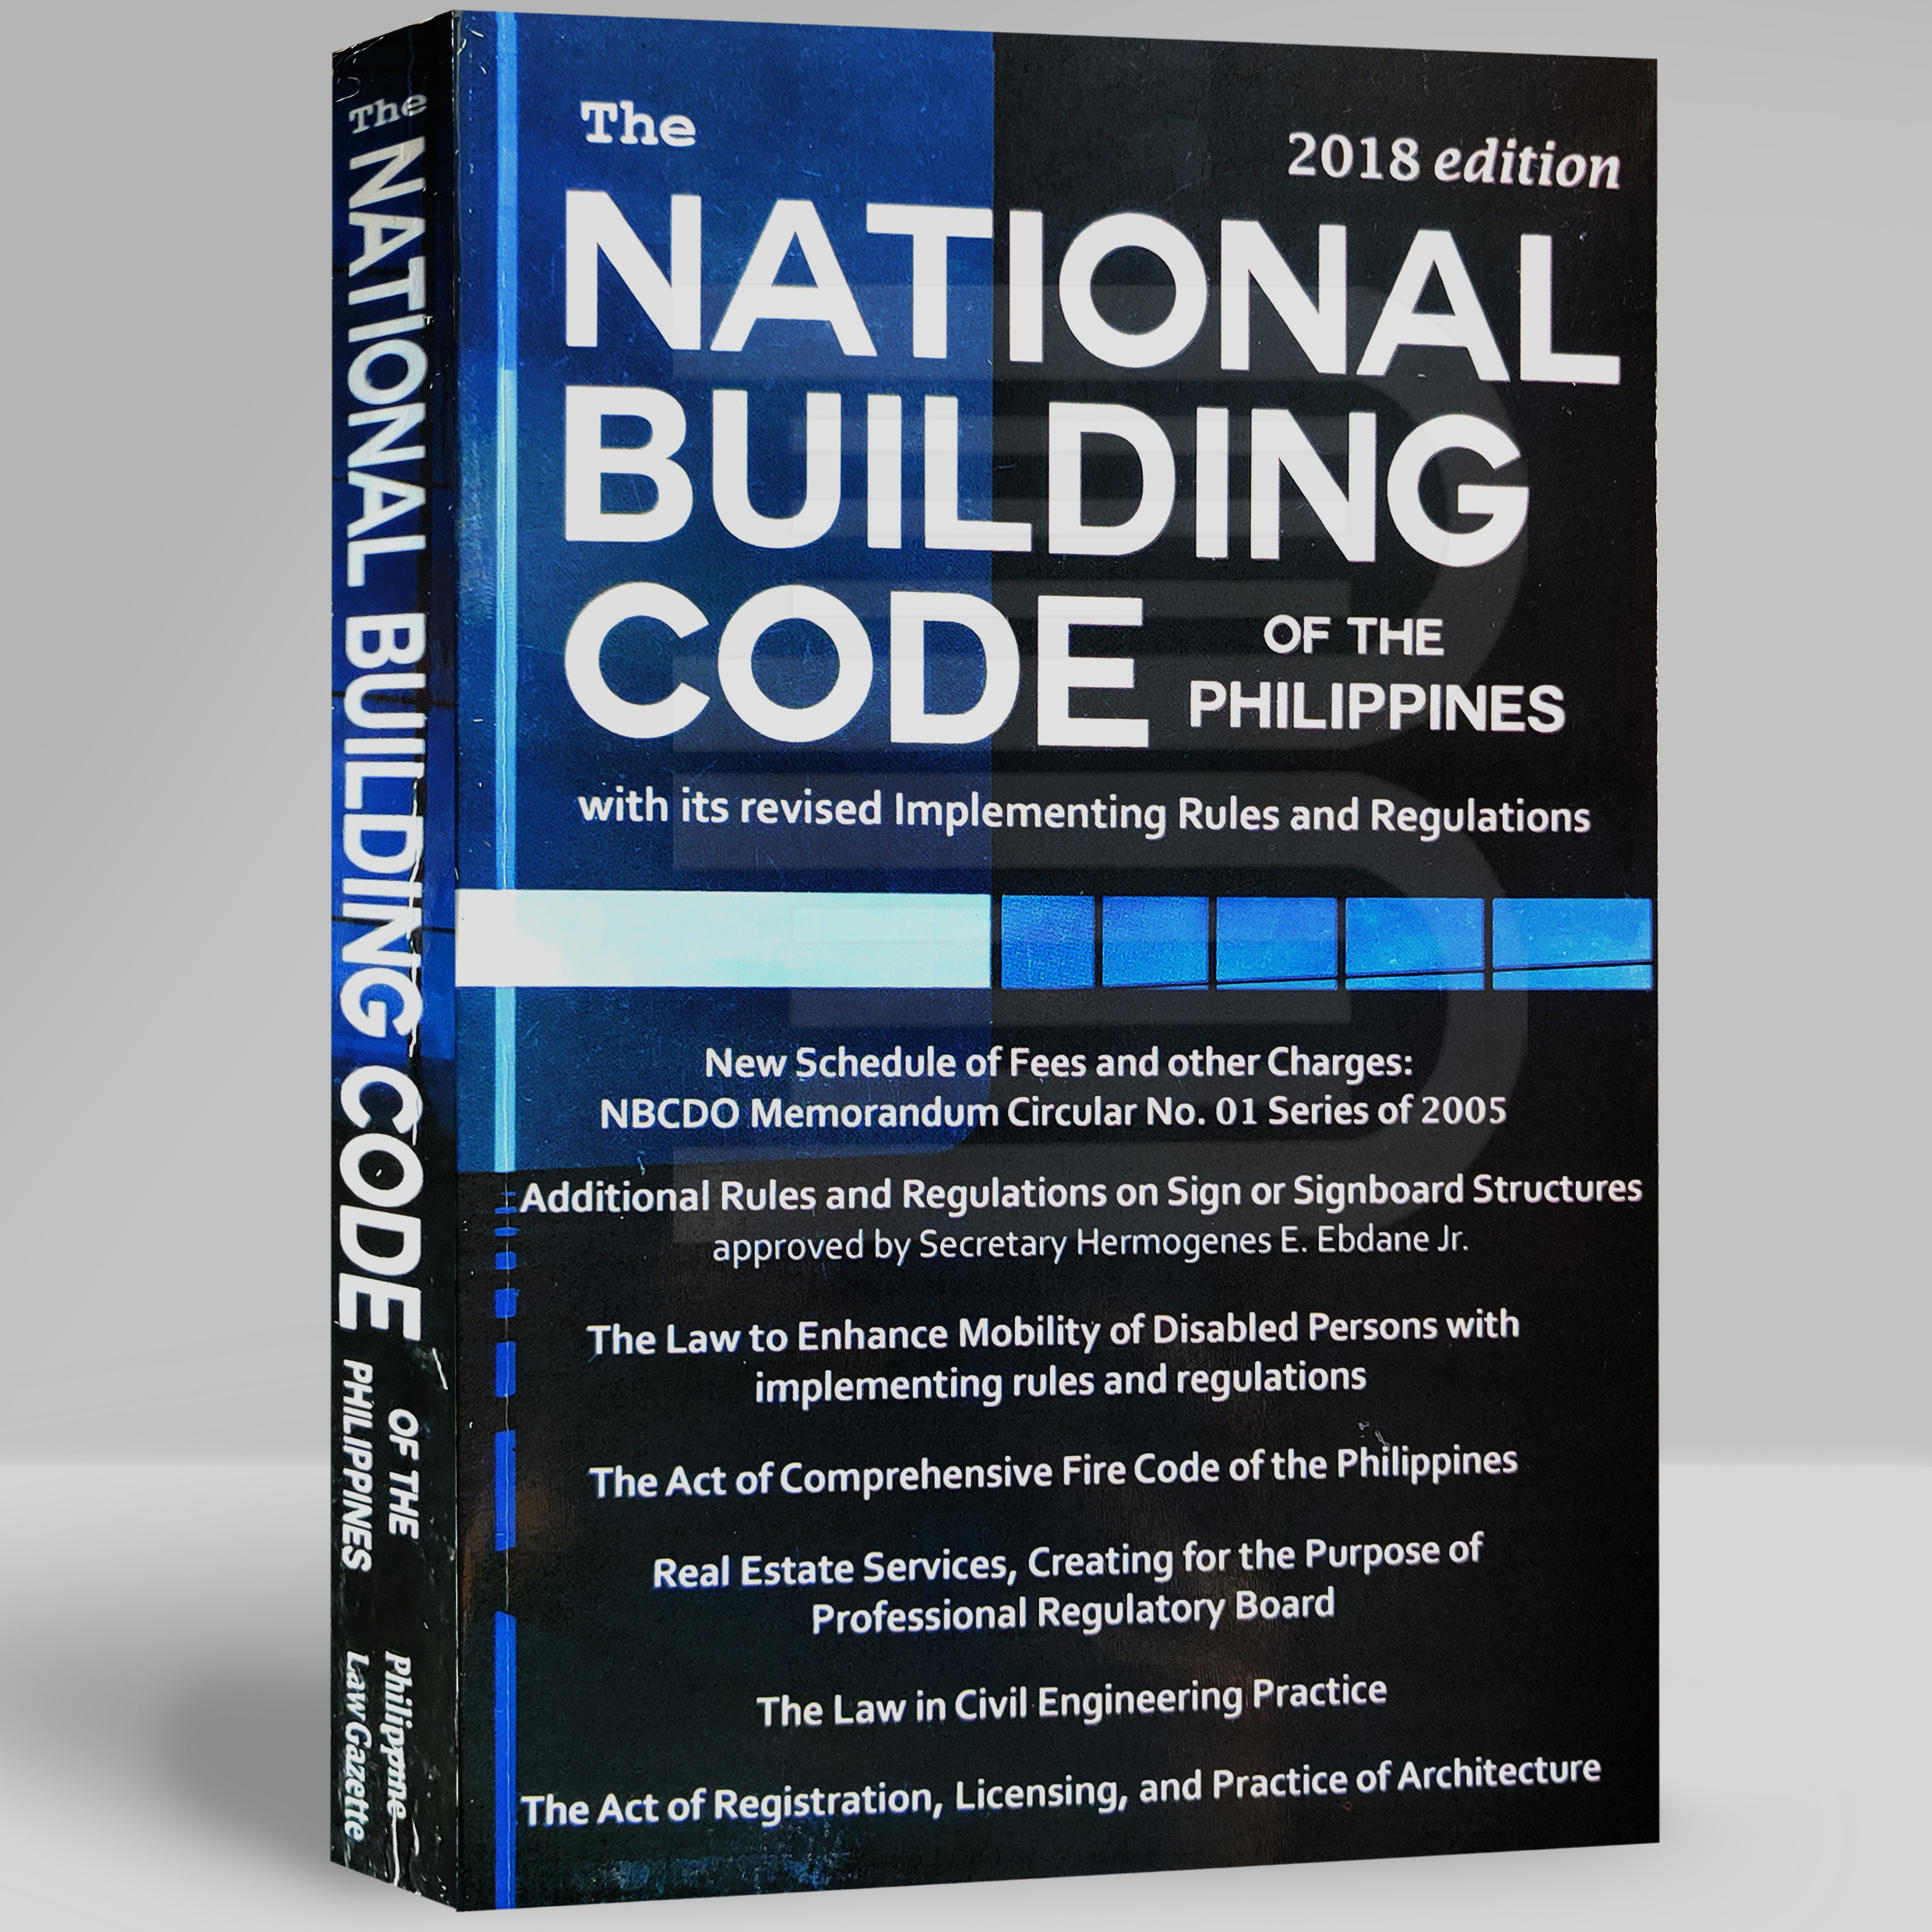 The NATIONAL BUILDING CODE OF THE PHILIPPINES - 2018 Edition | Lazada PH